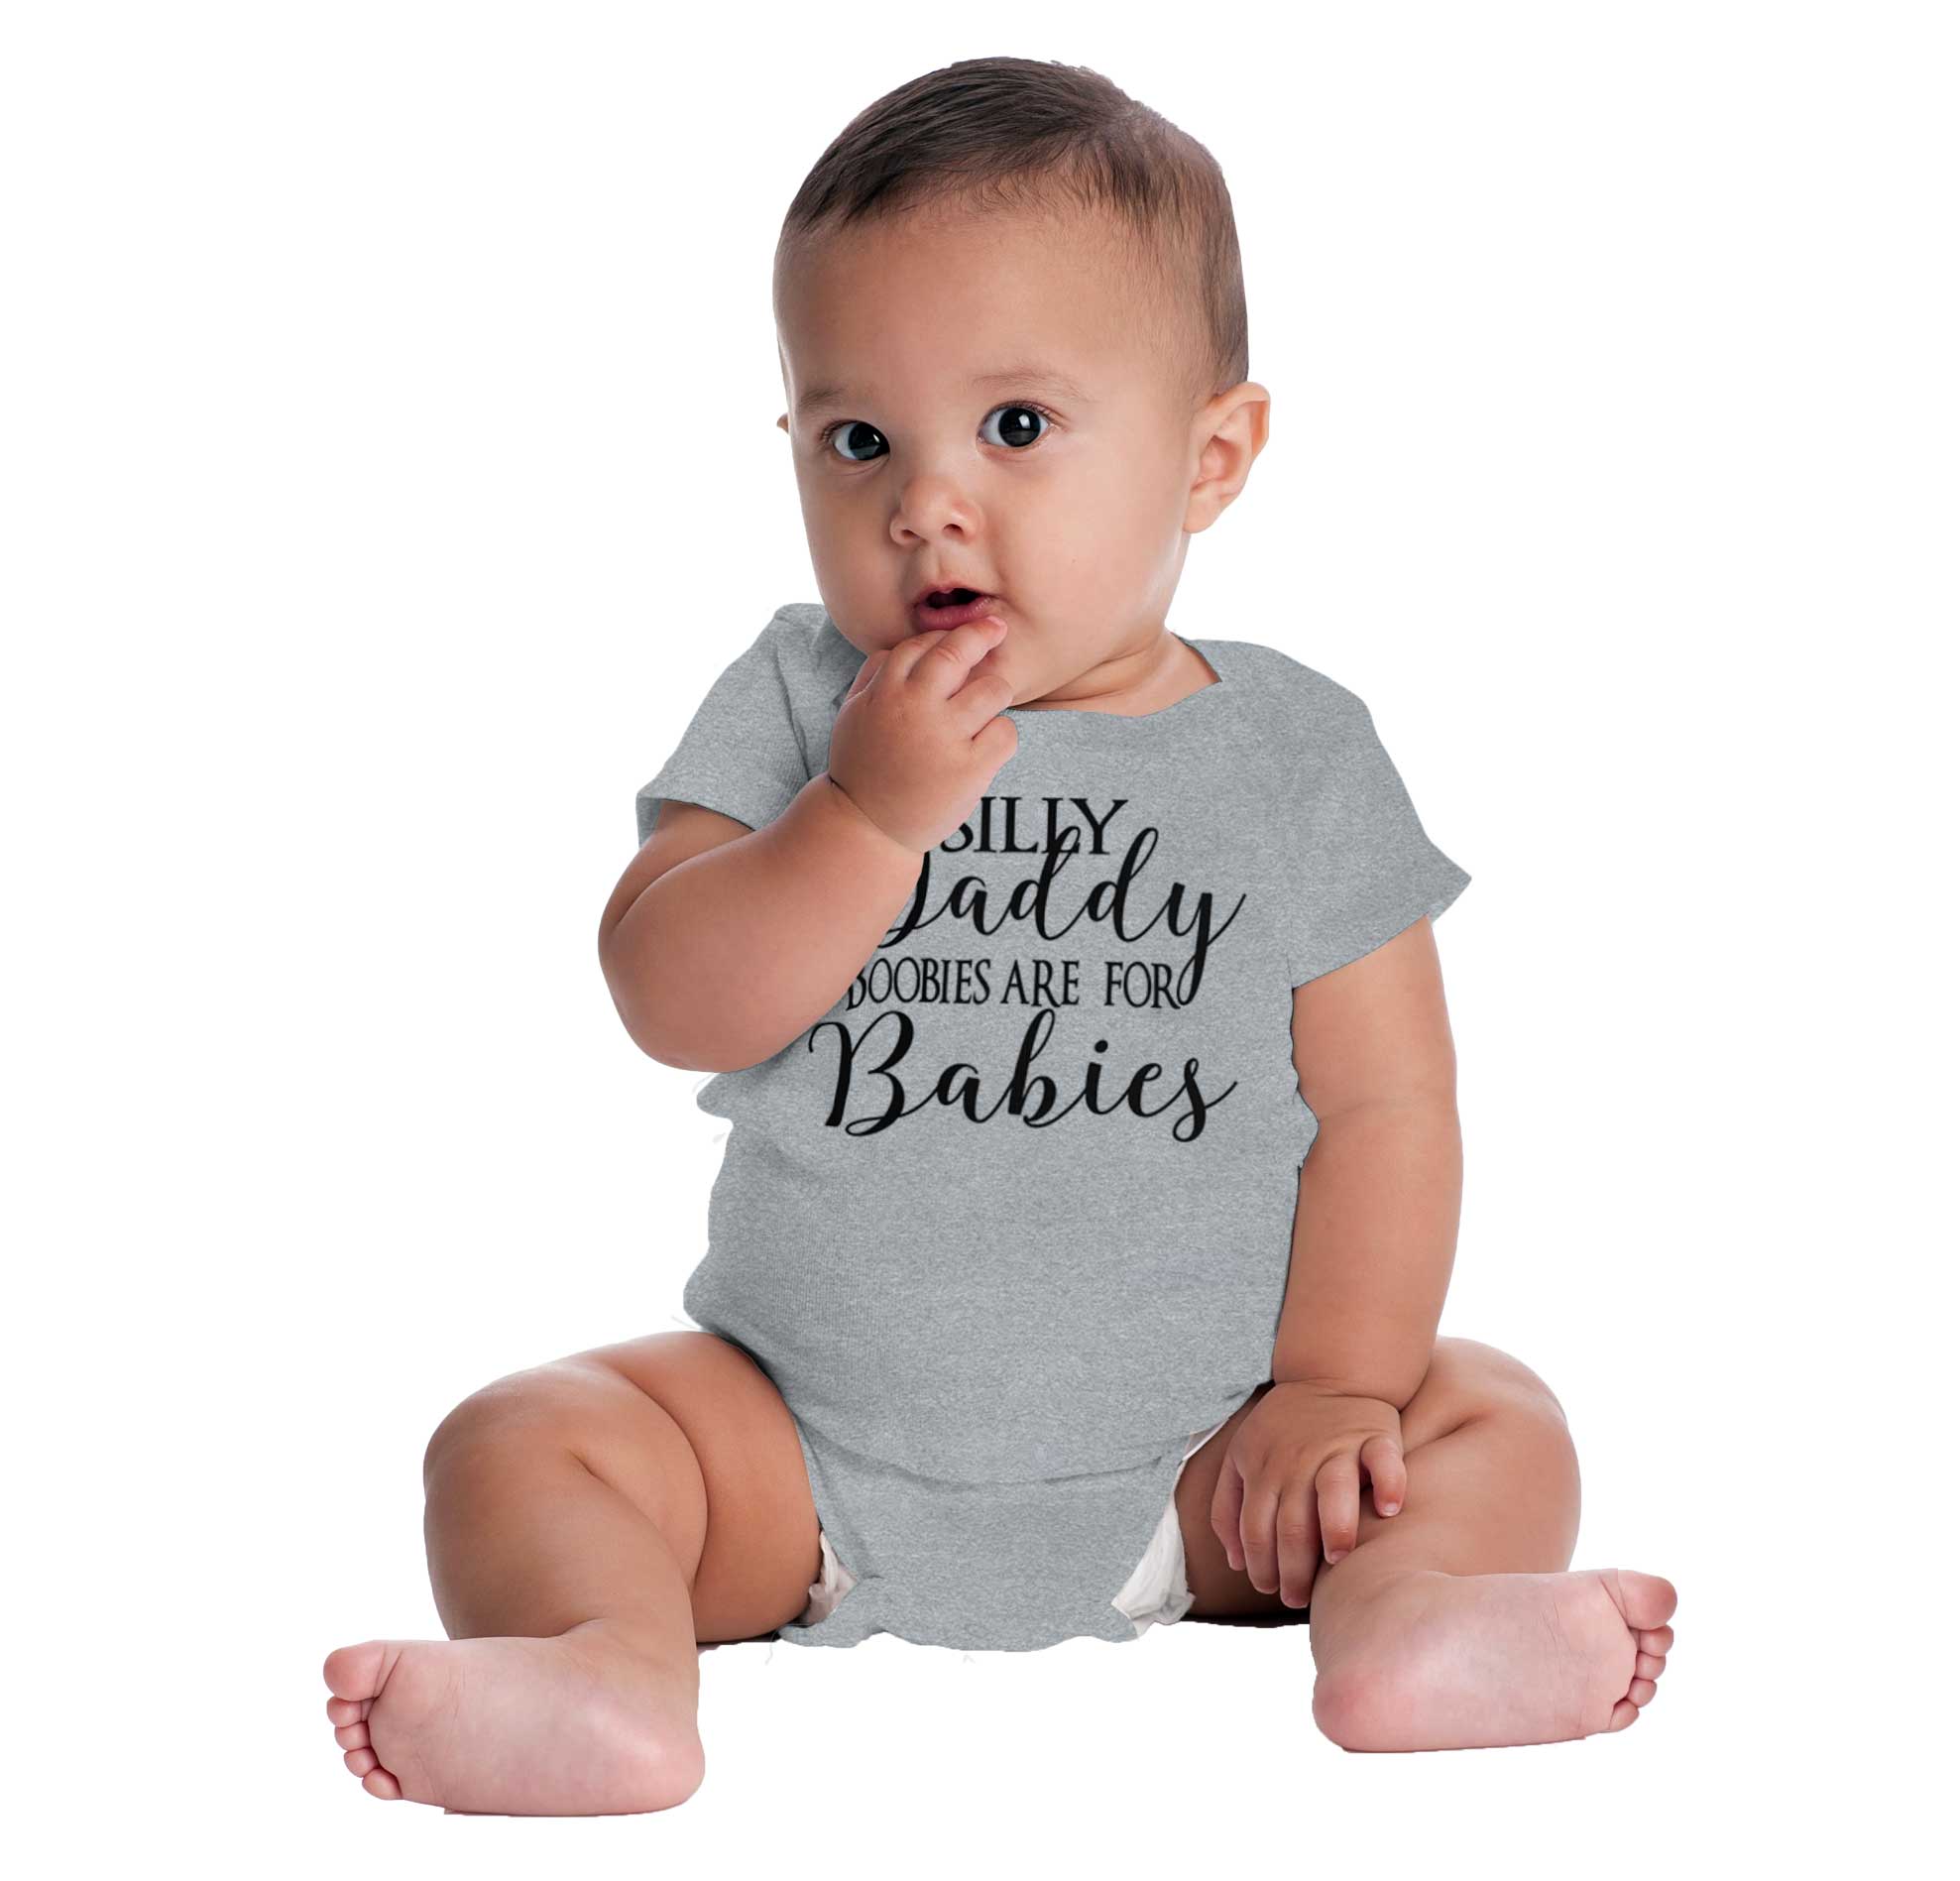 Silly Daddy Boobies Are For Babies Romper Bodysuit | Brisco Baby